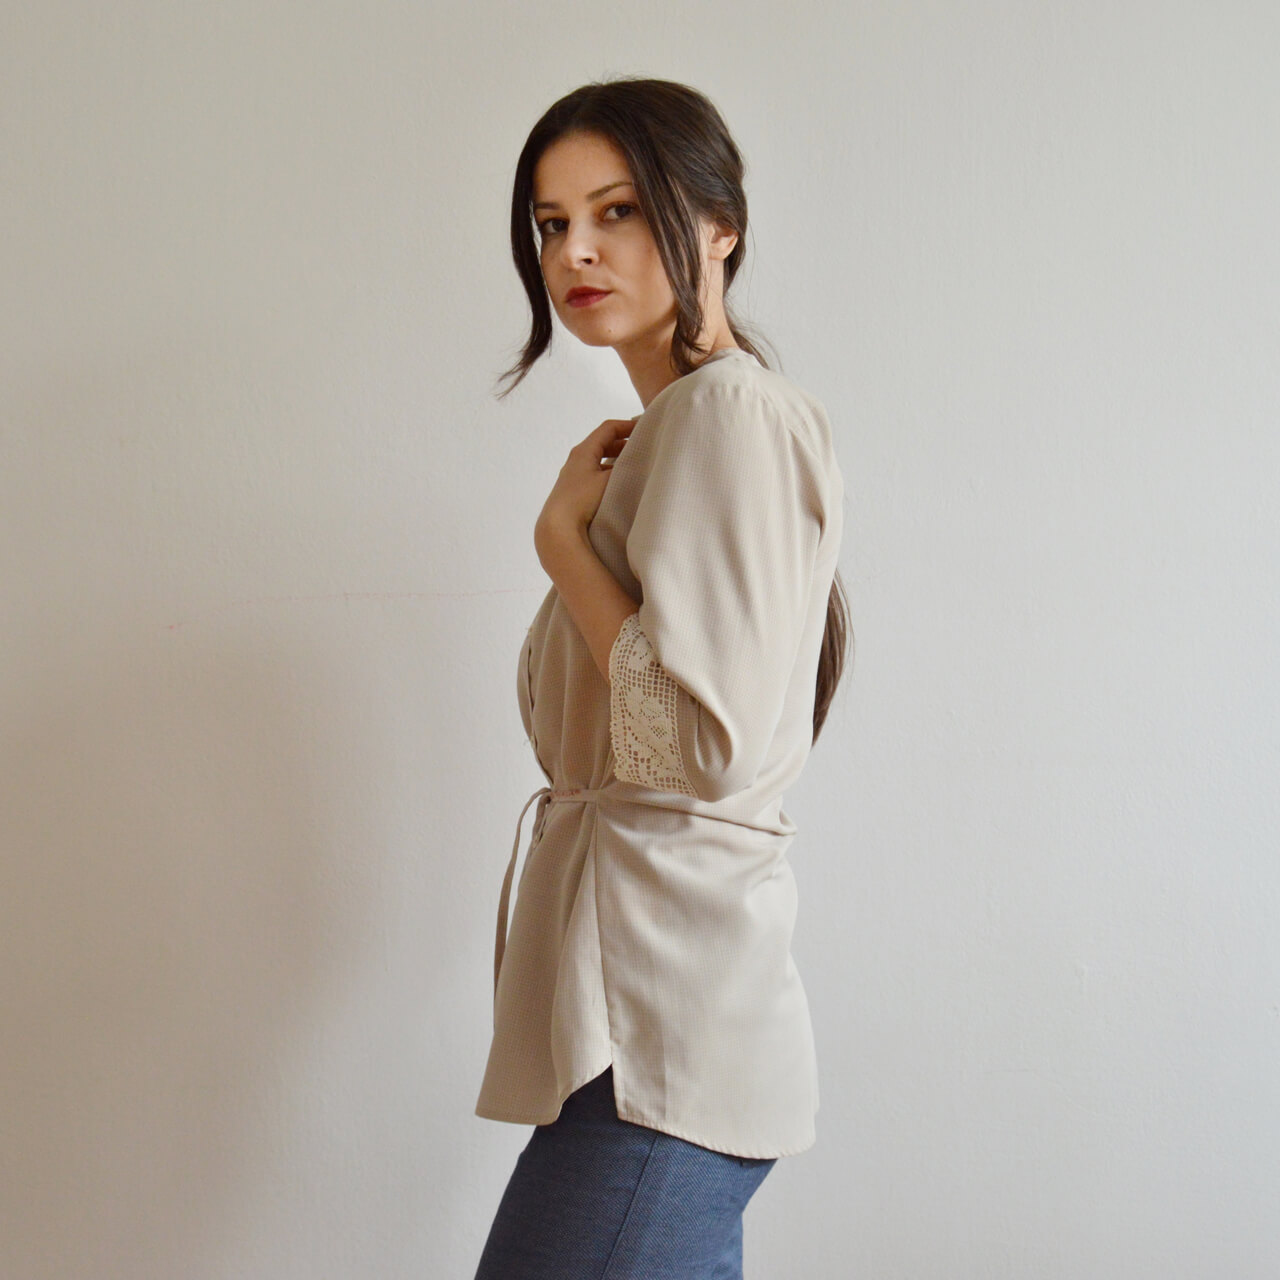 Sustainable fashion brand from Prague